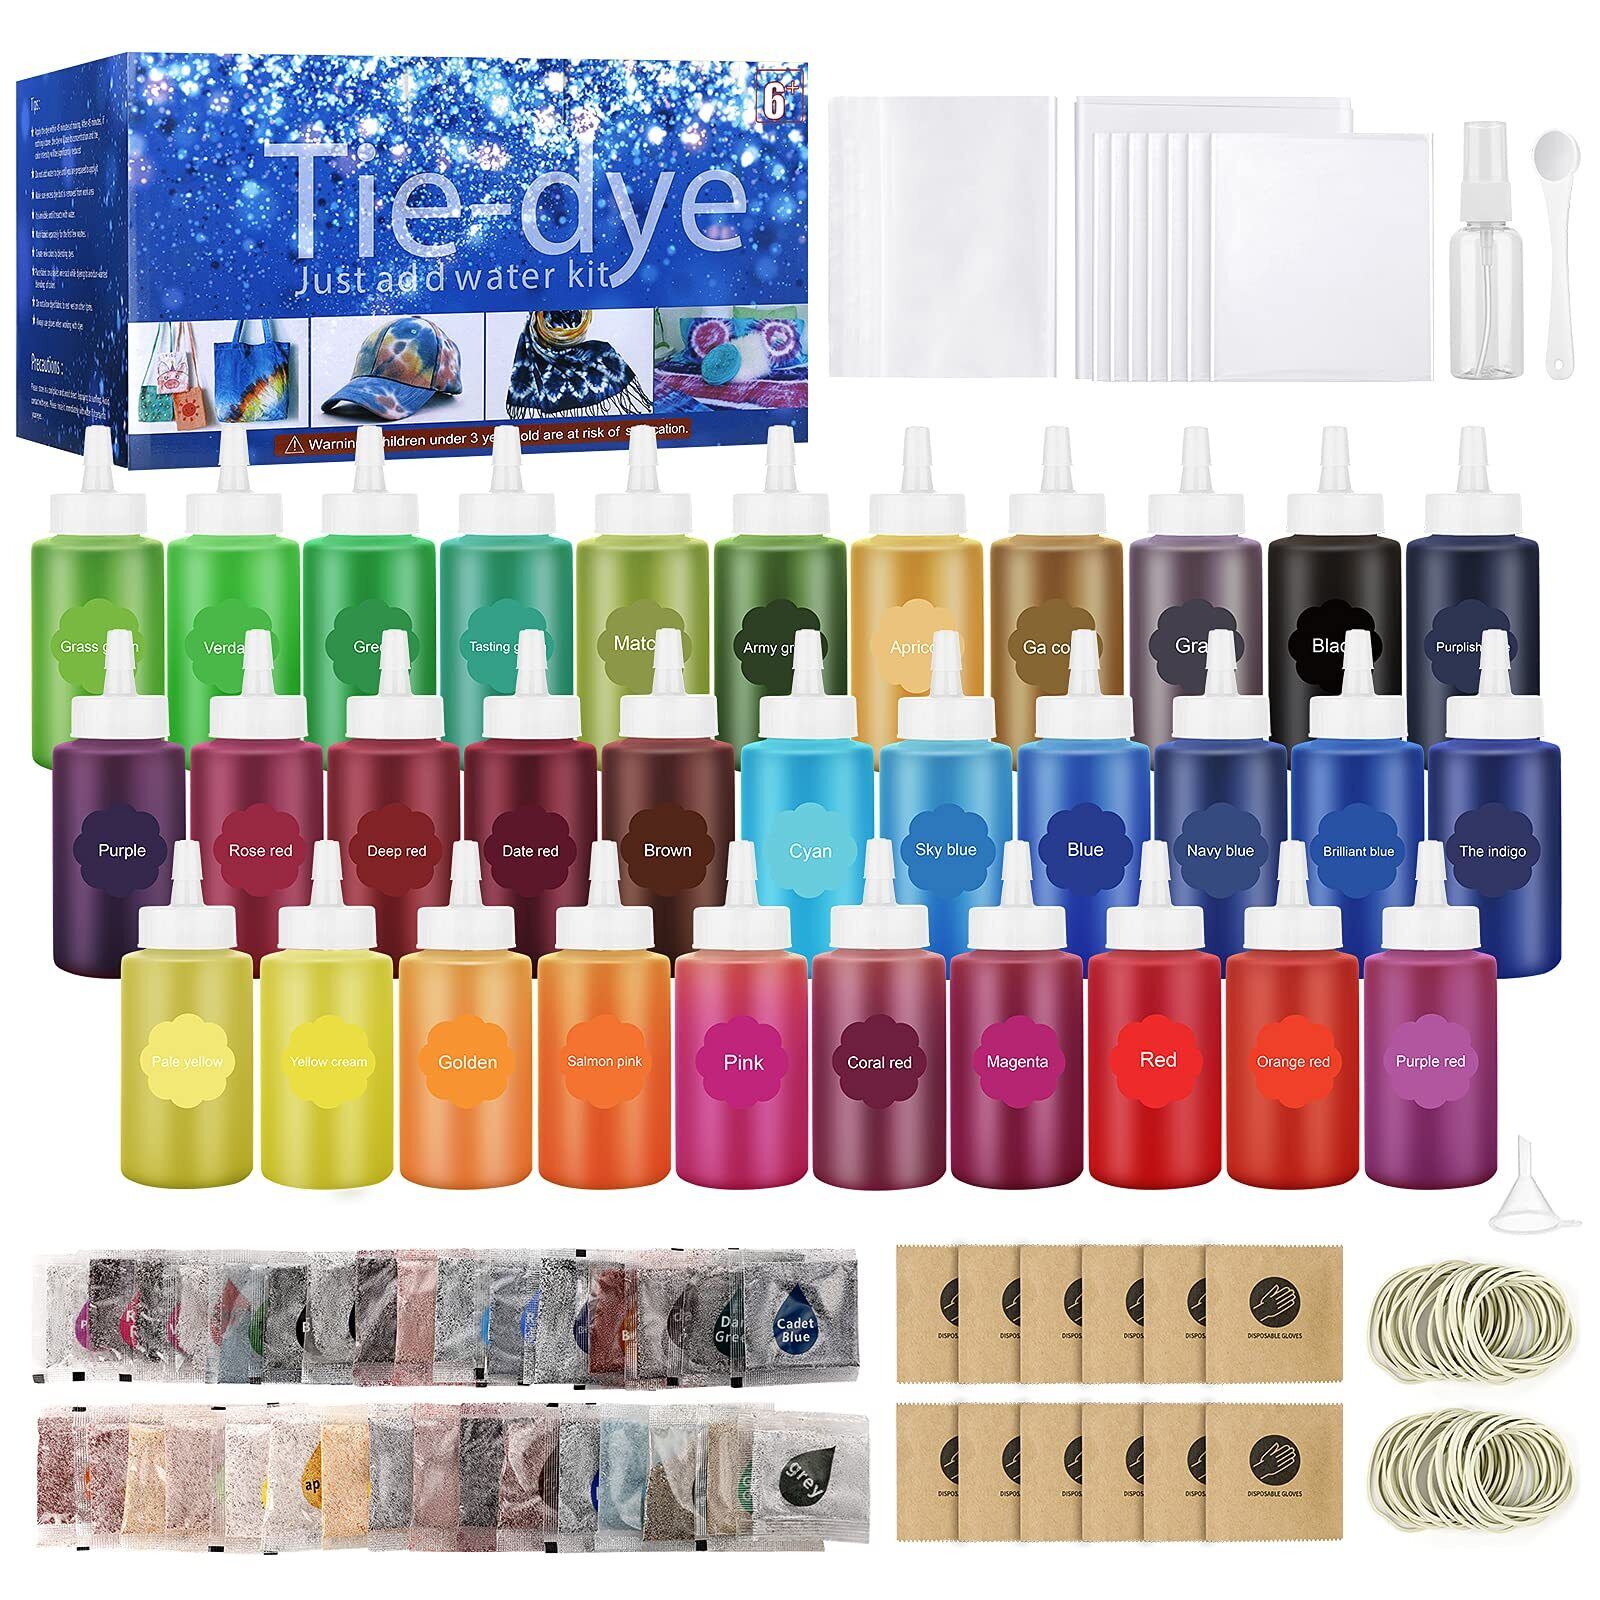 32 Color Tie Dye Kit, Fabric Dye Art Kit with Rubber Bands, Gloves, Plastic Film